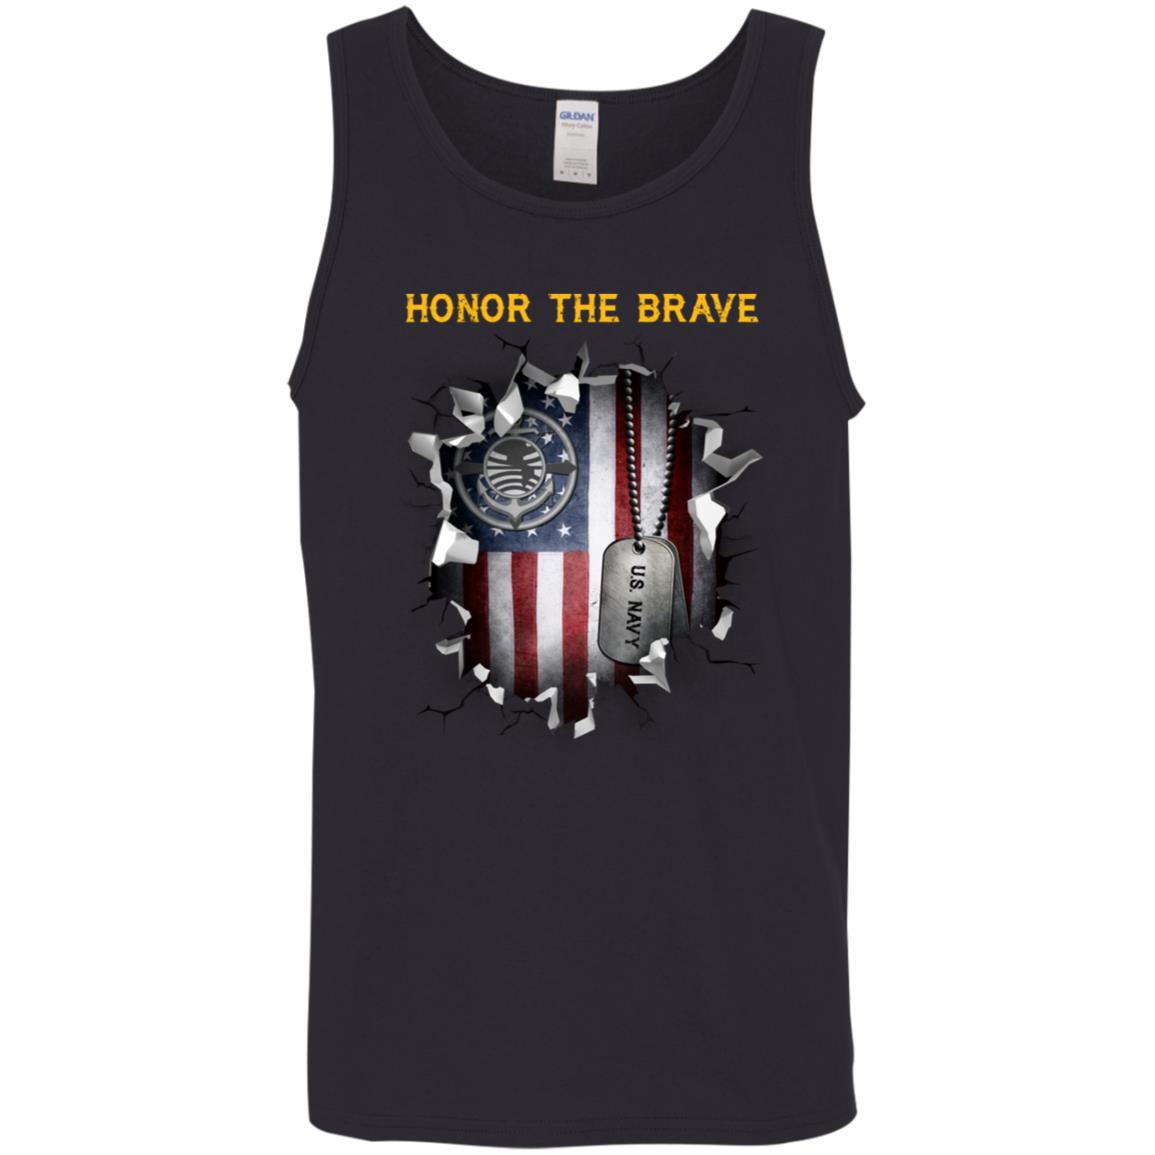 Navy Religious Program Specialist Navy RP - Honor The Brave Front Shirt